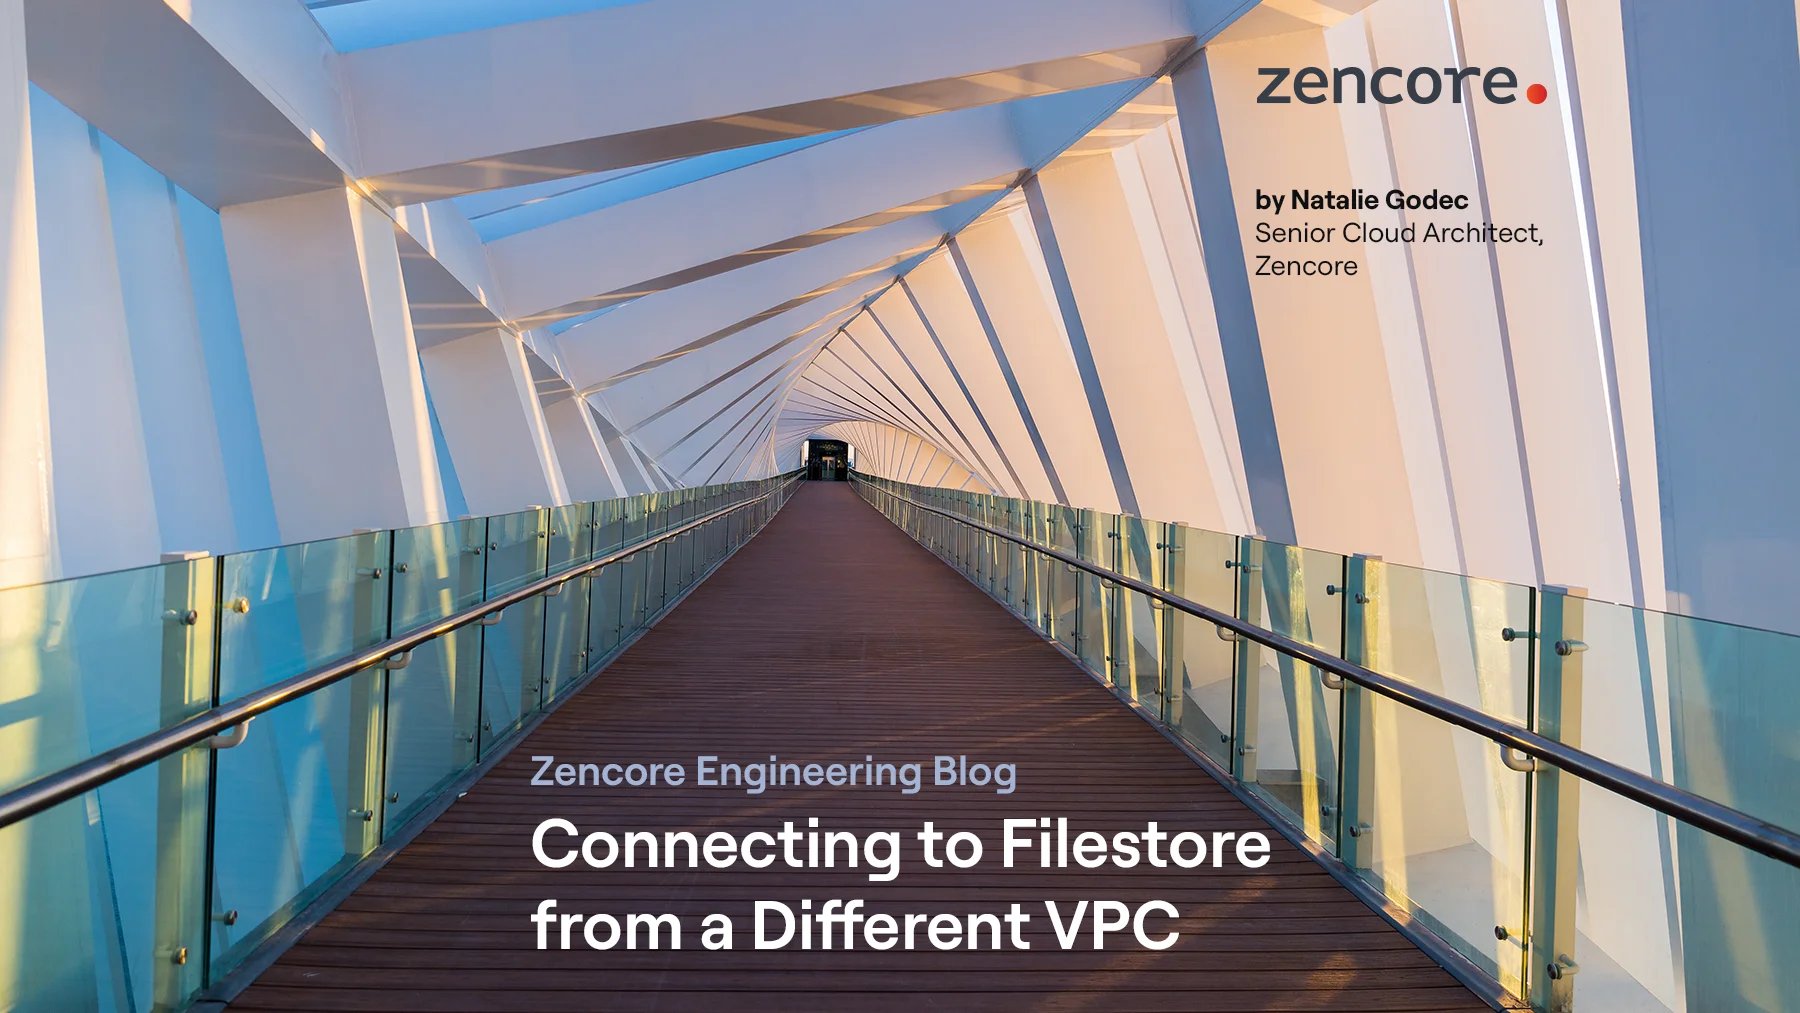 Connecting to Filestore from a Different VPC, by Natalie Godec